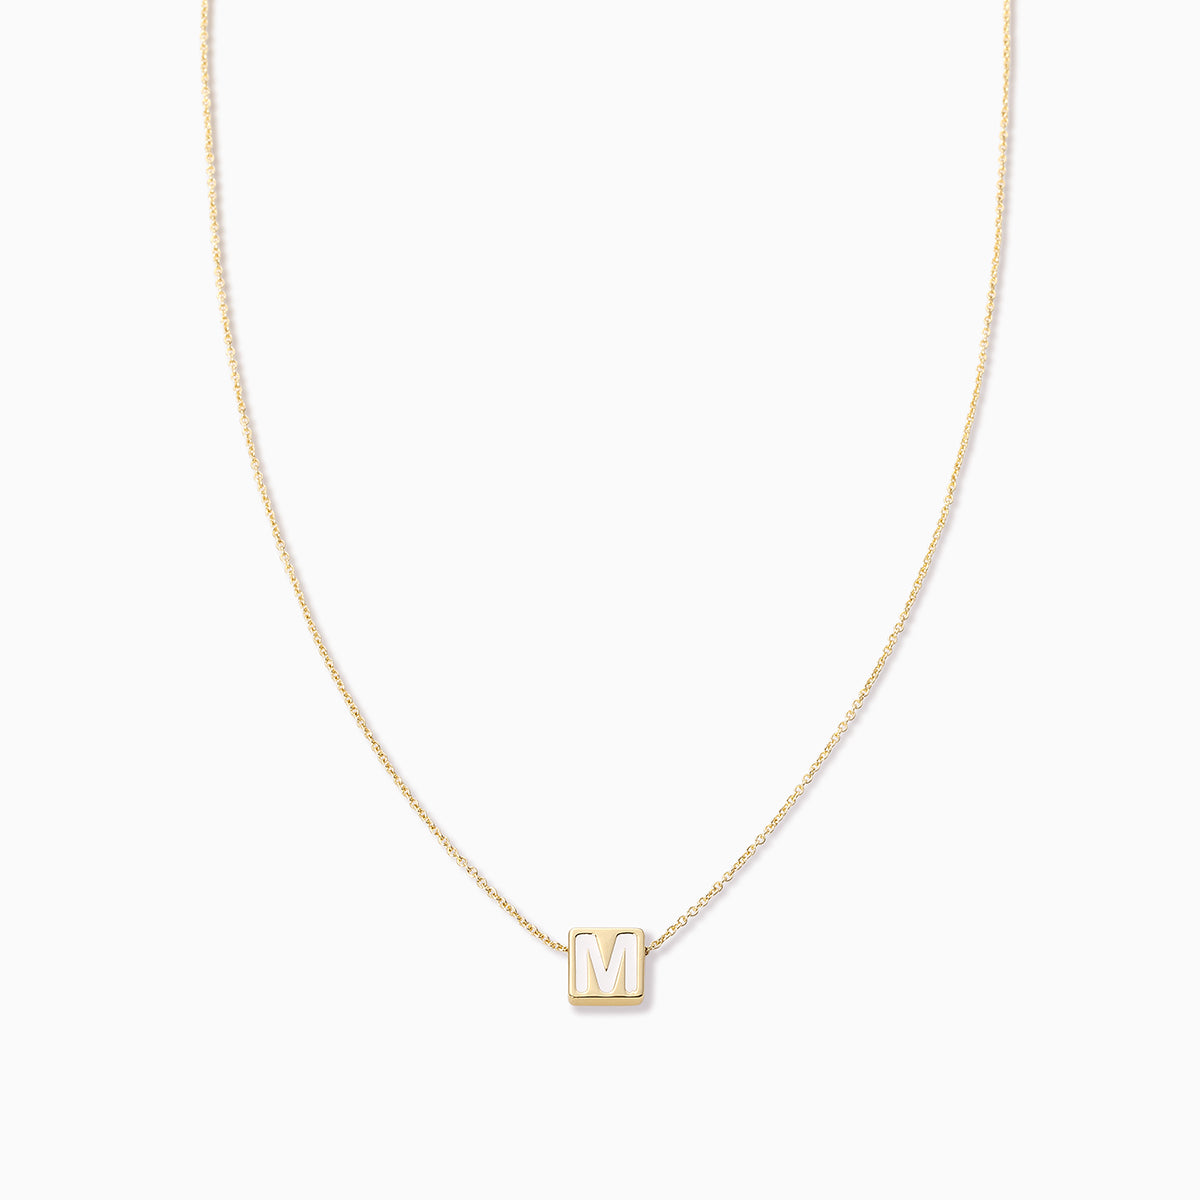 Bold Letter Necklace | Gold M | Product Image | Uncommon James